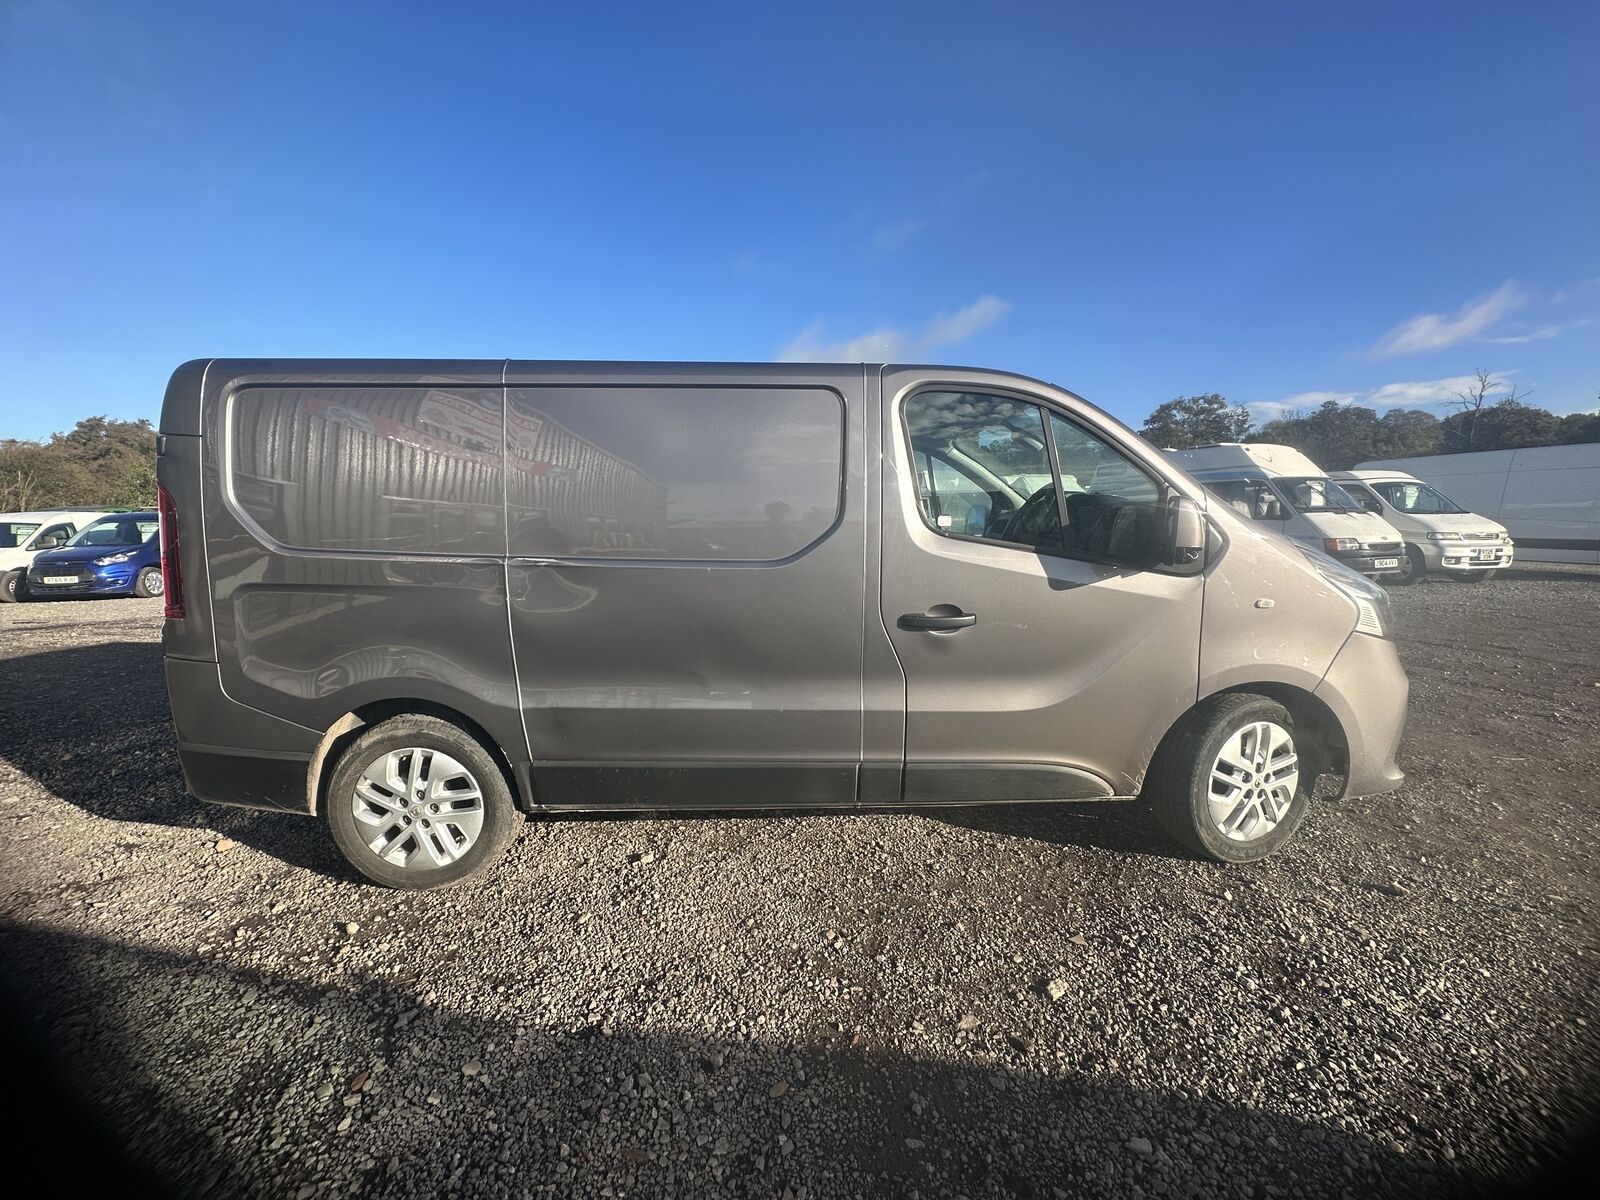 Bid on CRUISE IN GREY COMFORT: RENAULT TRAFIC VIVARO HONEST WORKHORSE - MOT MAY 2024 - NO VAT ON HAMMER- Buy &amp; Sell on Auction with EAMA Group